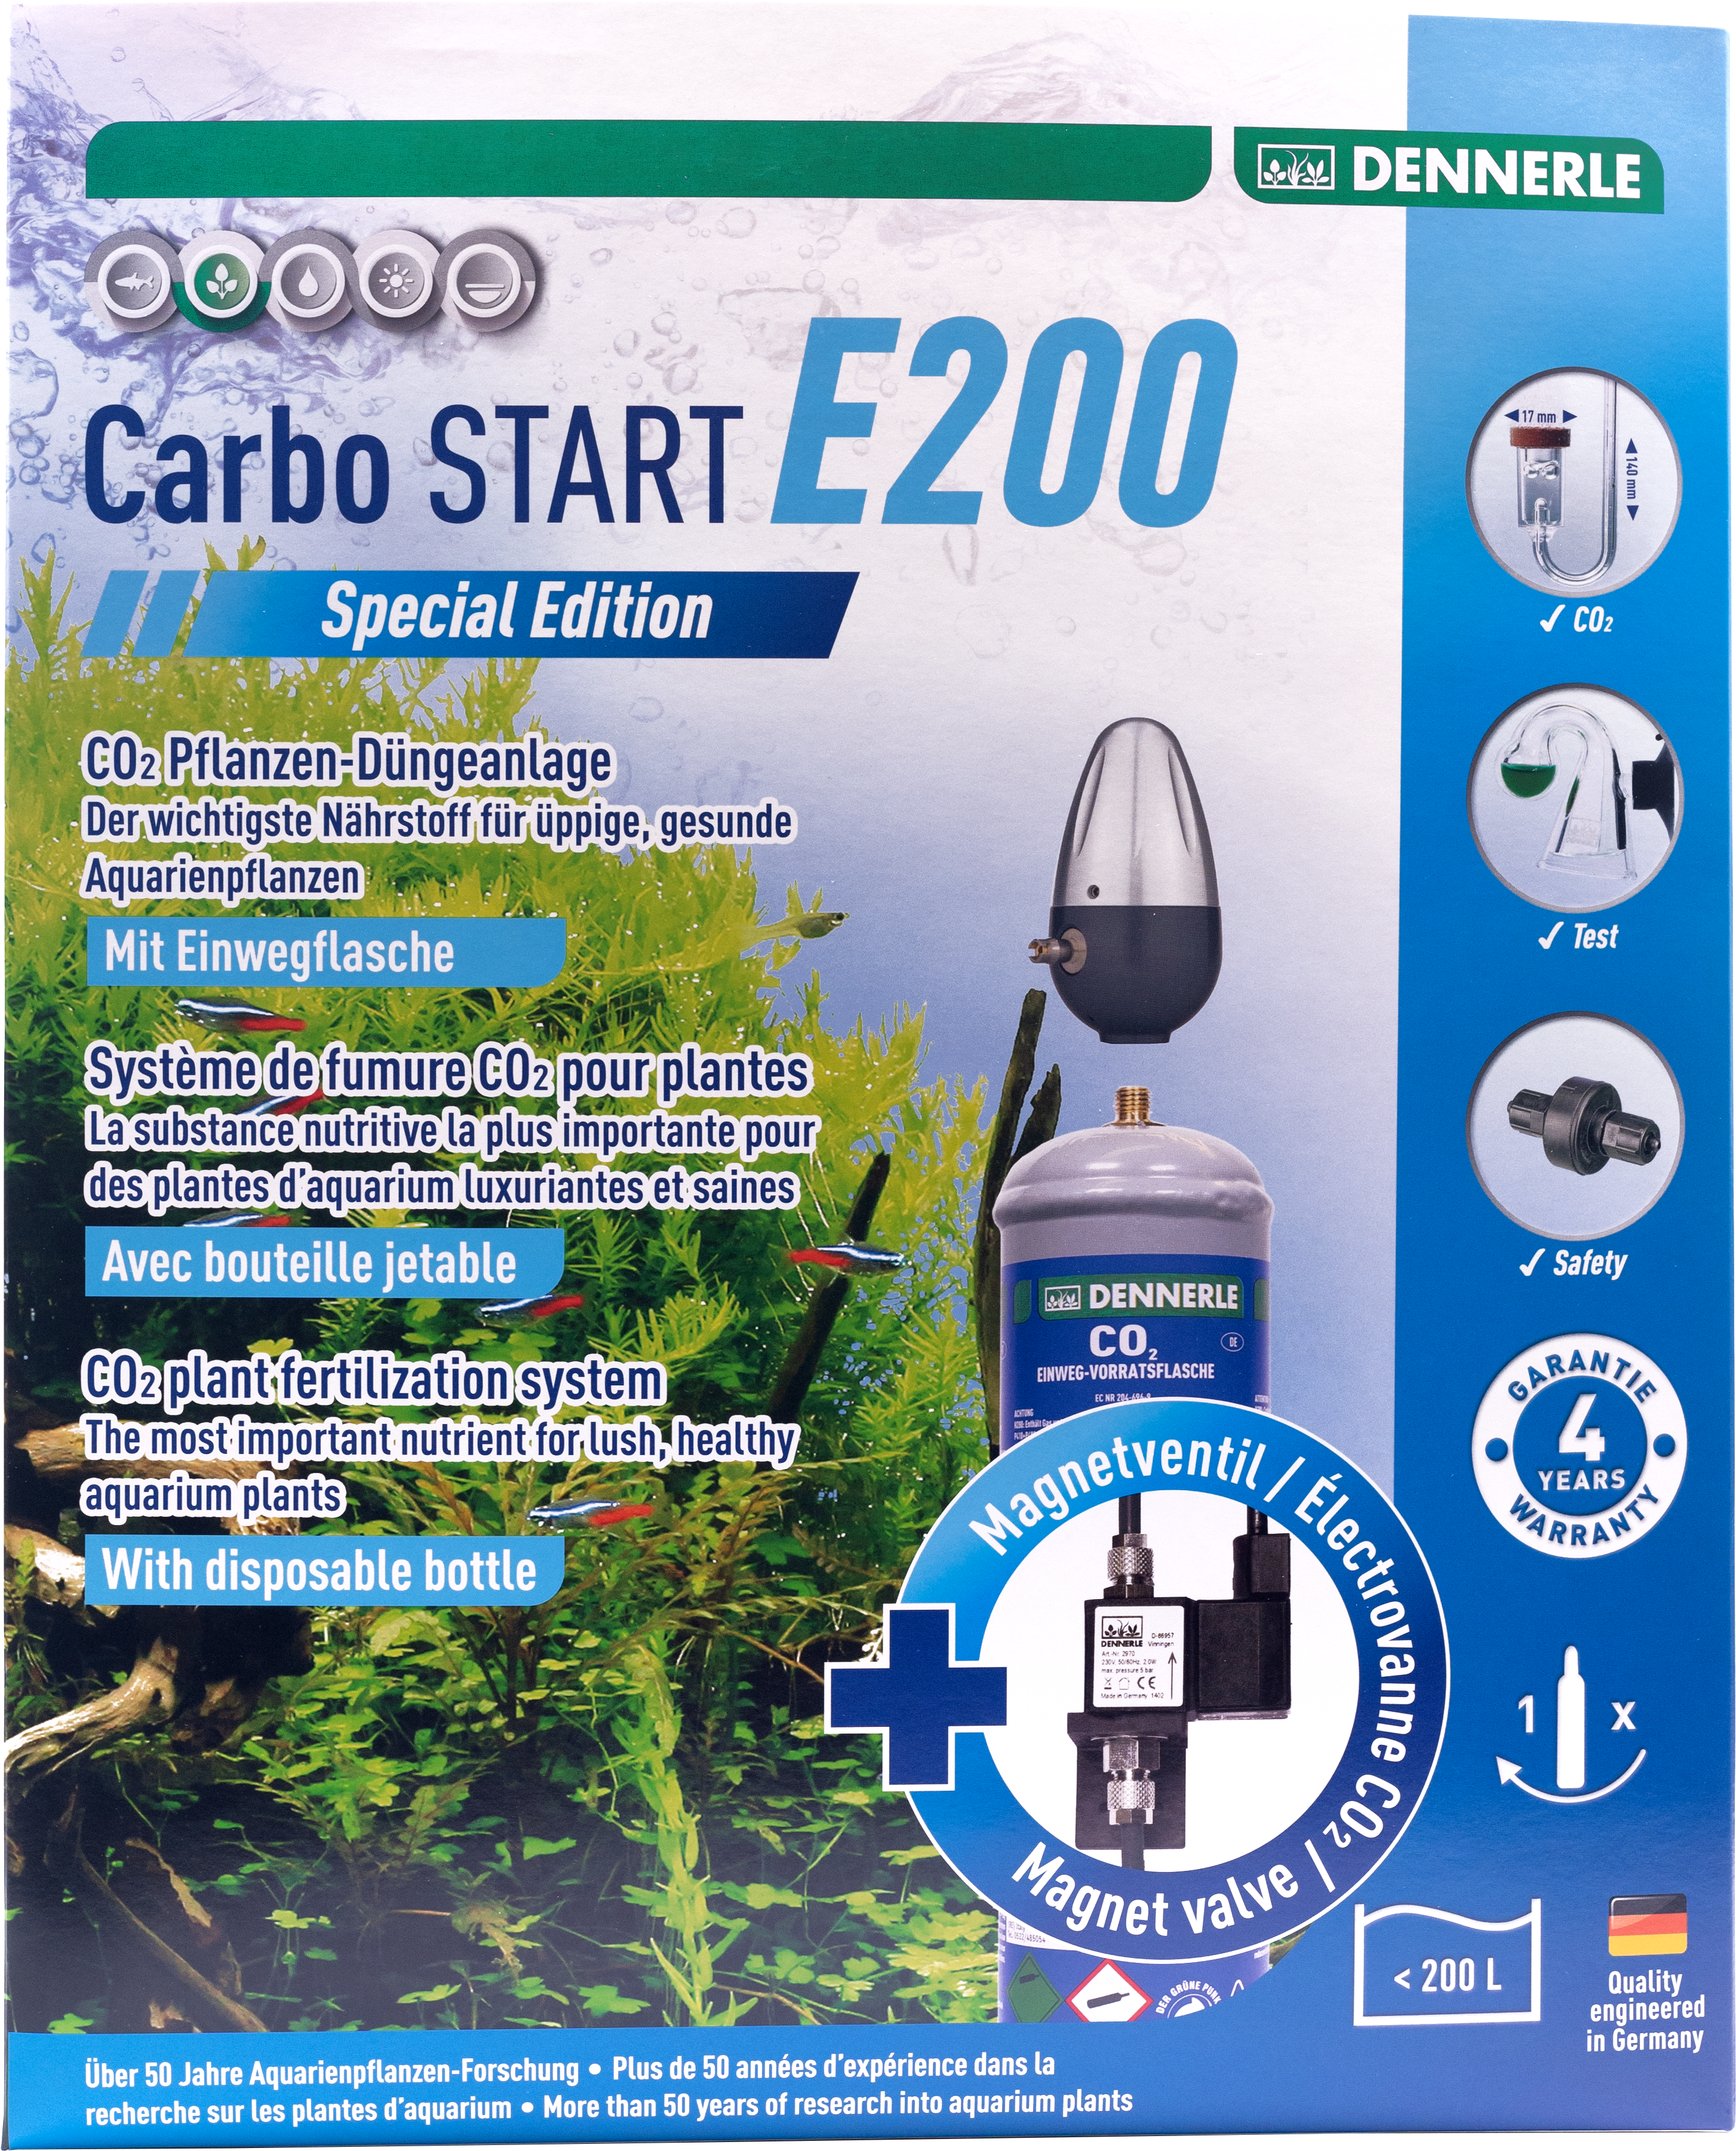 Dennerle CARBO START E200 SPECIAL EDITION 2975